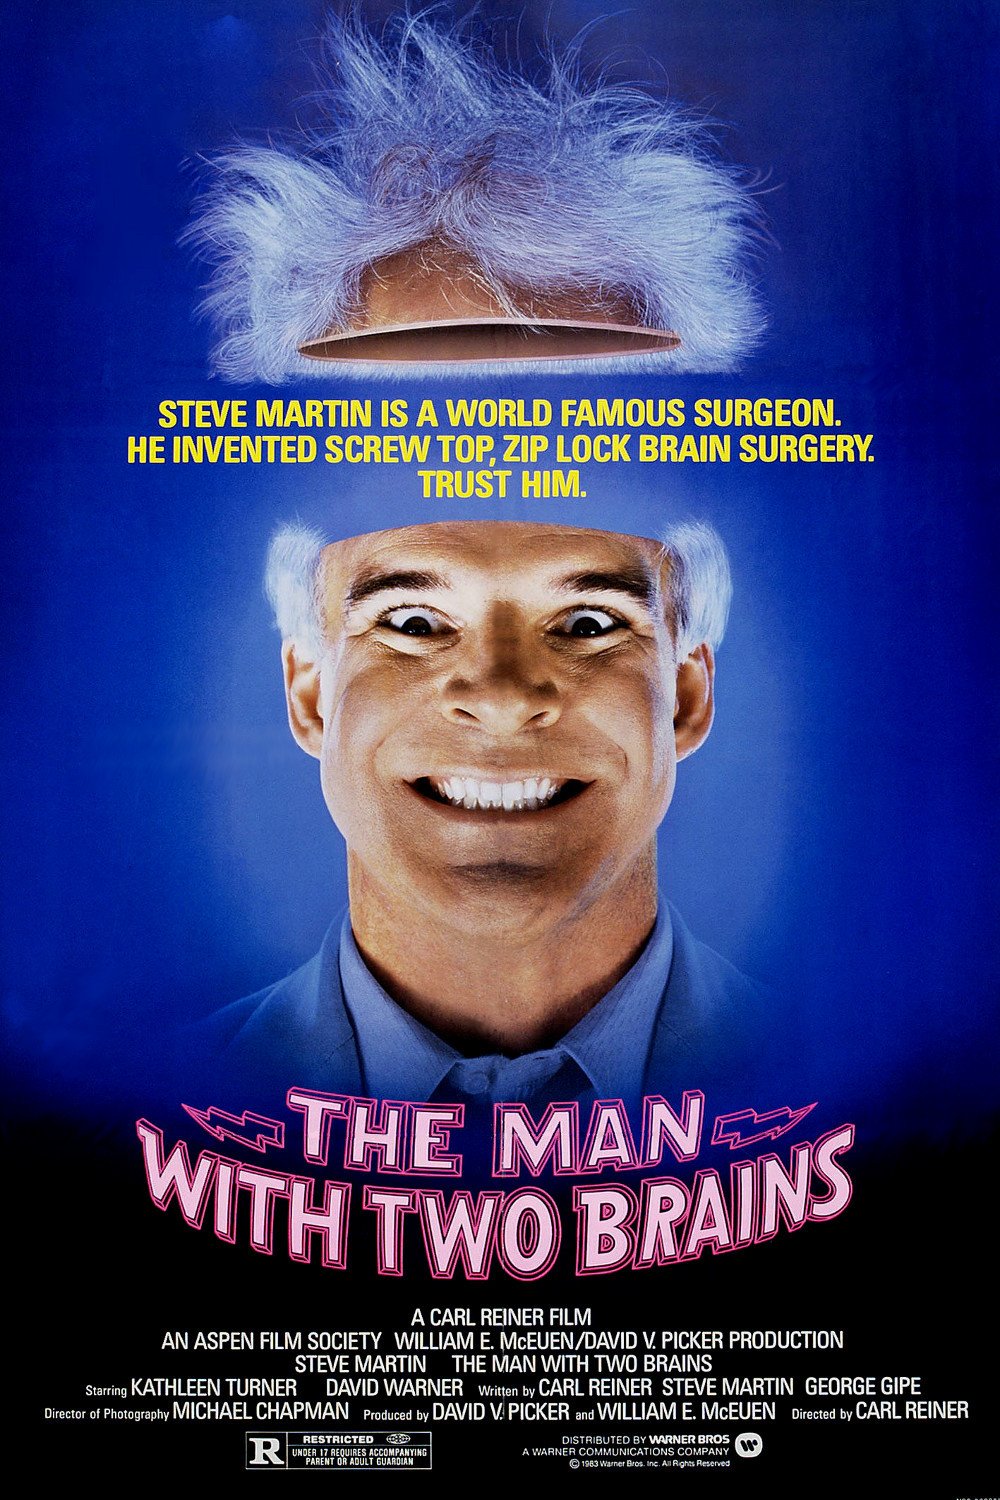 L'affiche du film The Man with Two Brains